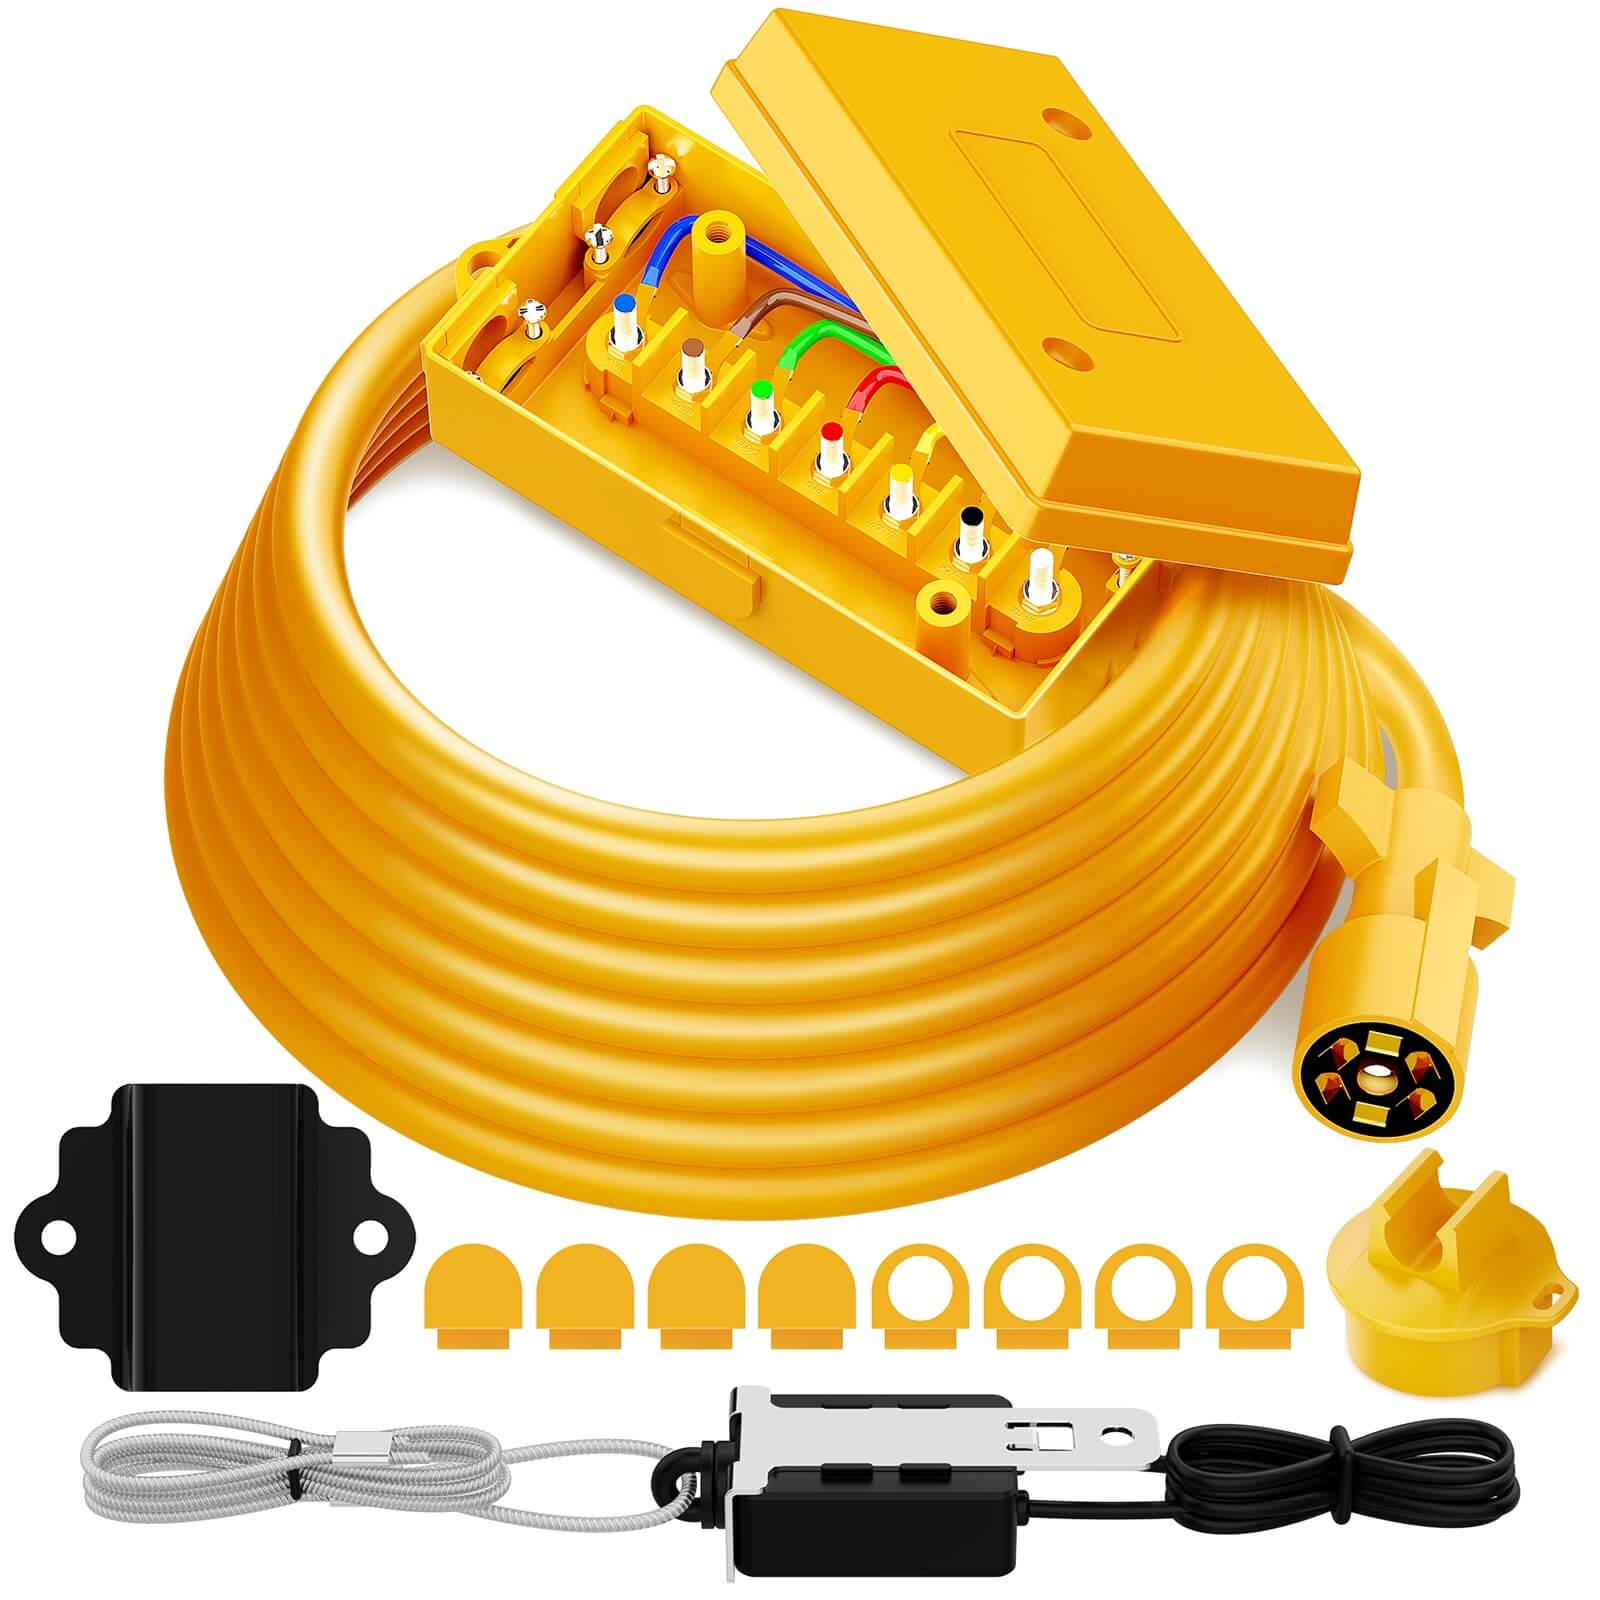 8/12 FT Heavy Duty 7 Way Trailer Cord Plug Connector with Yellow Cover 7 Gang Junction Box, Weatherproof